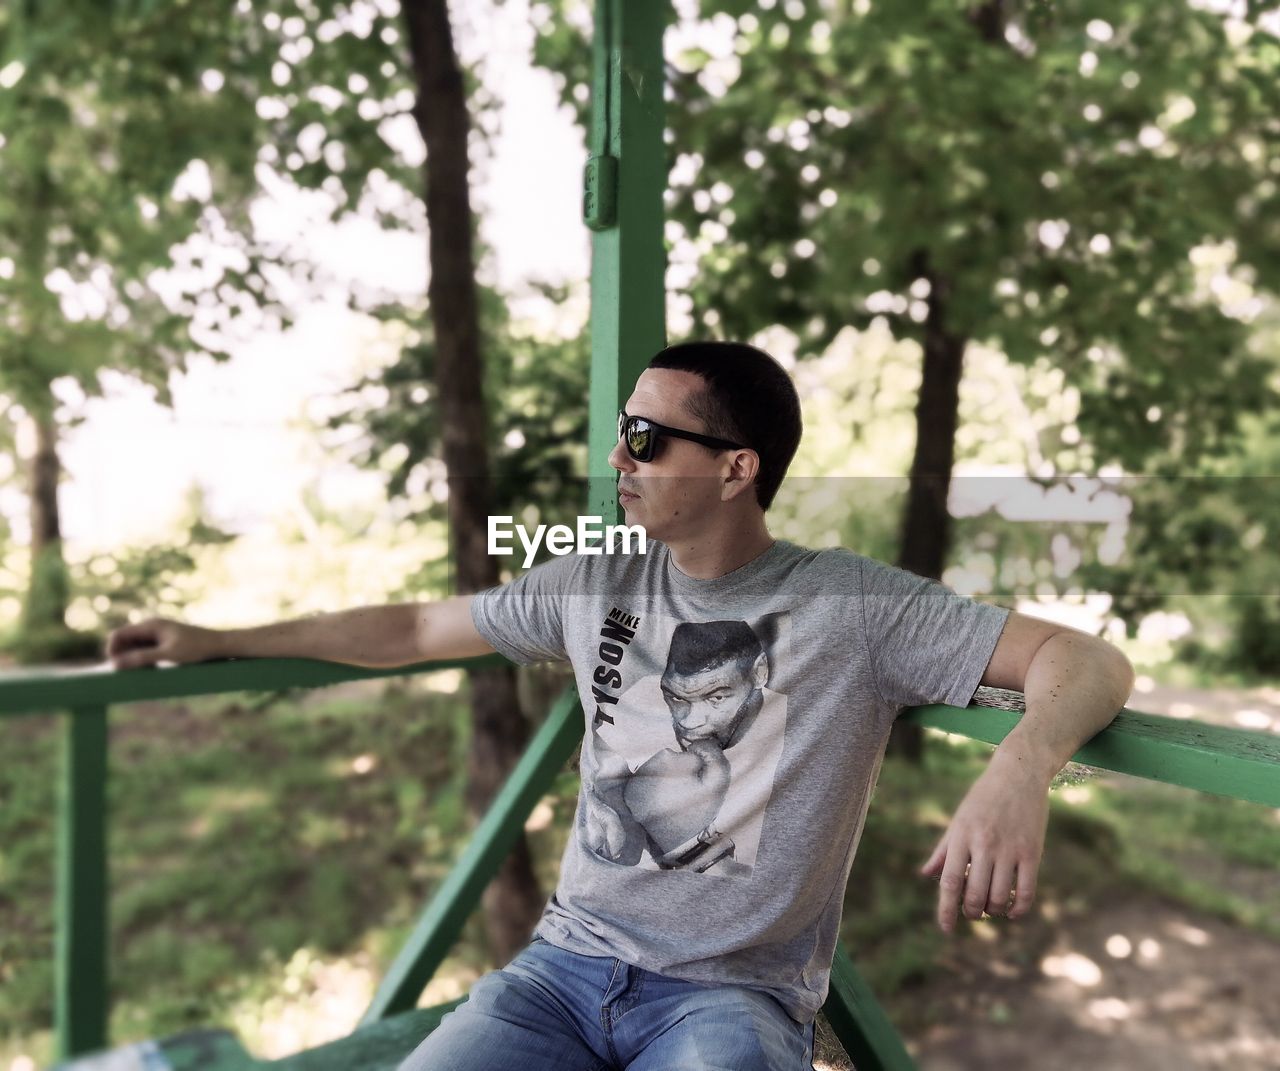 Man wearing sunglasses while sitting against trees